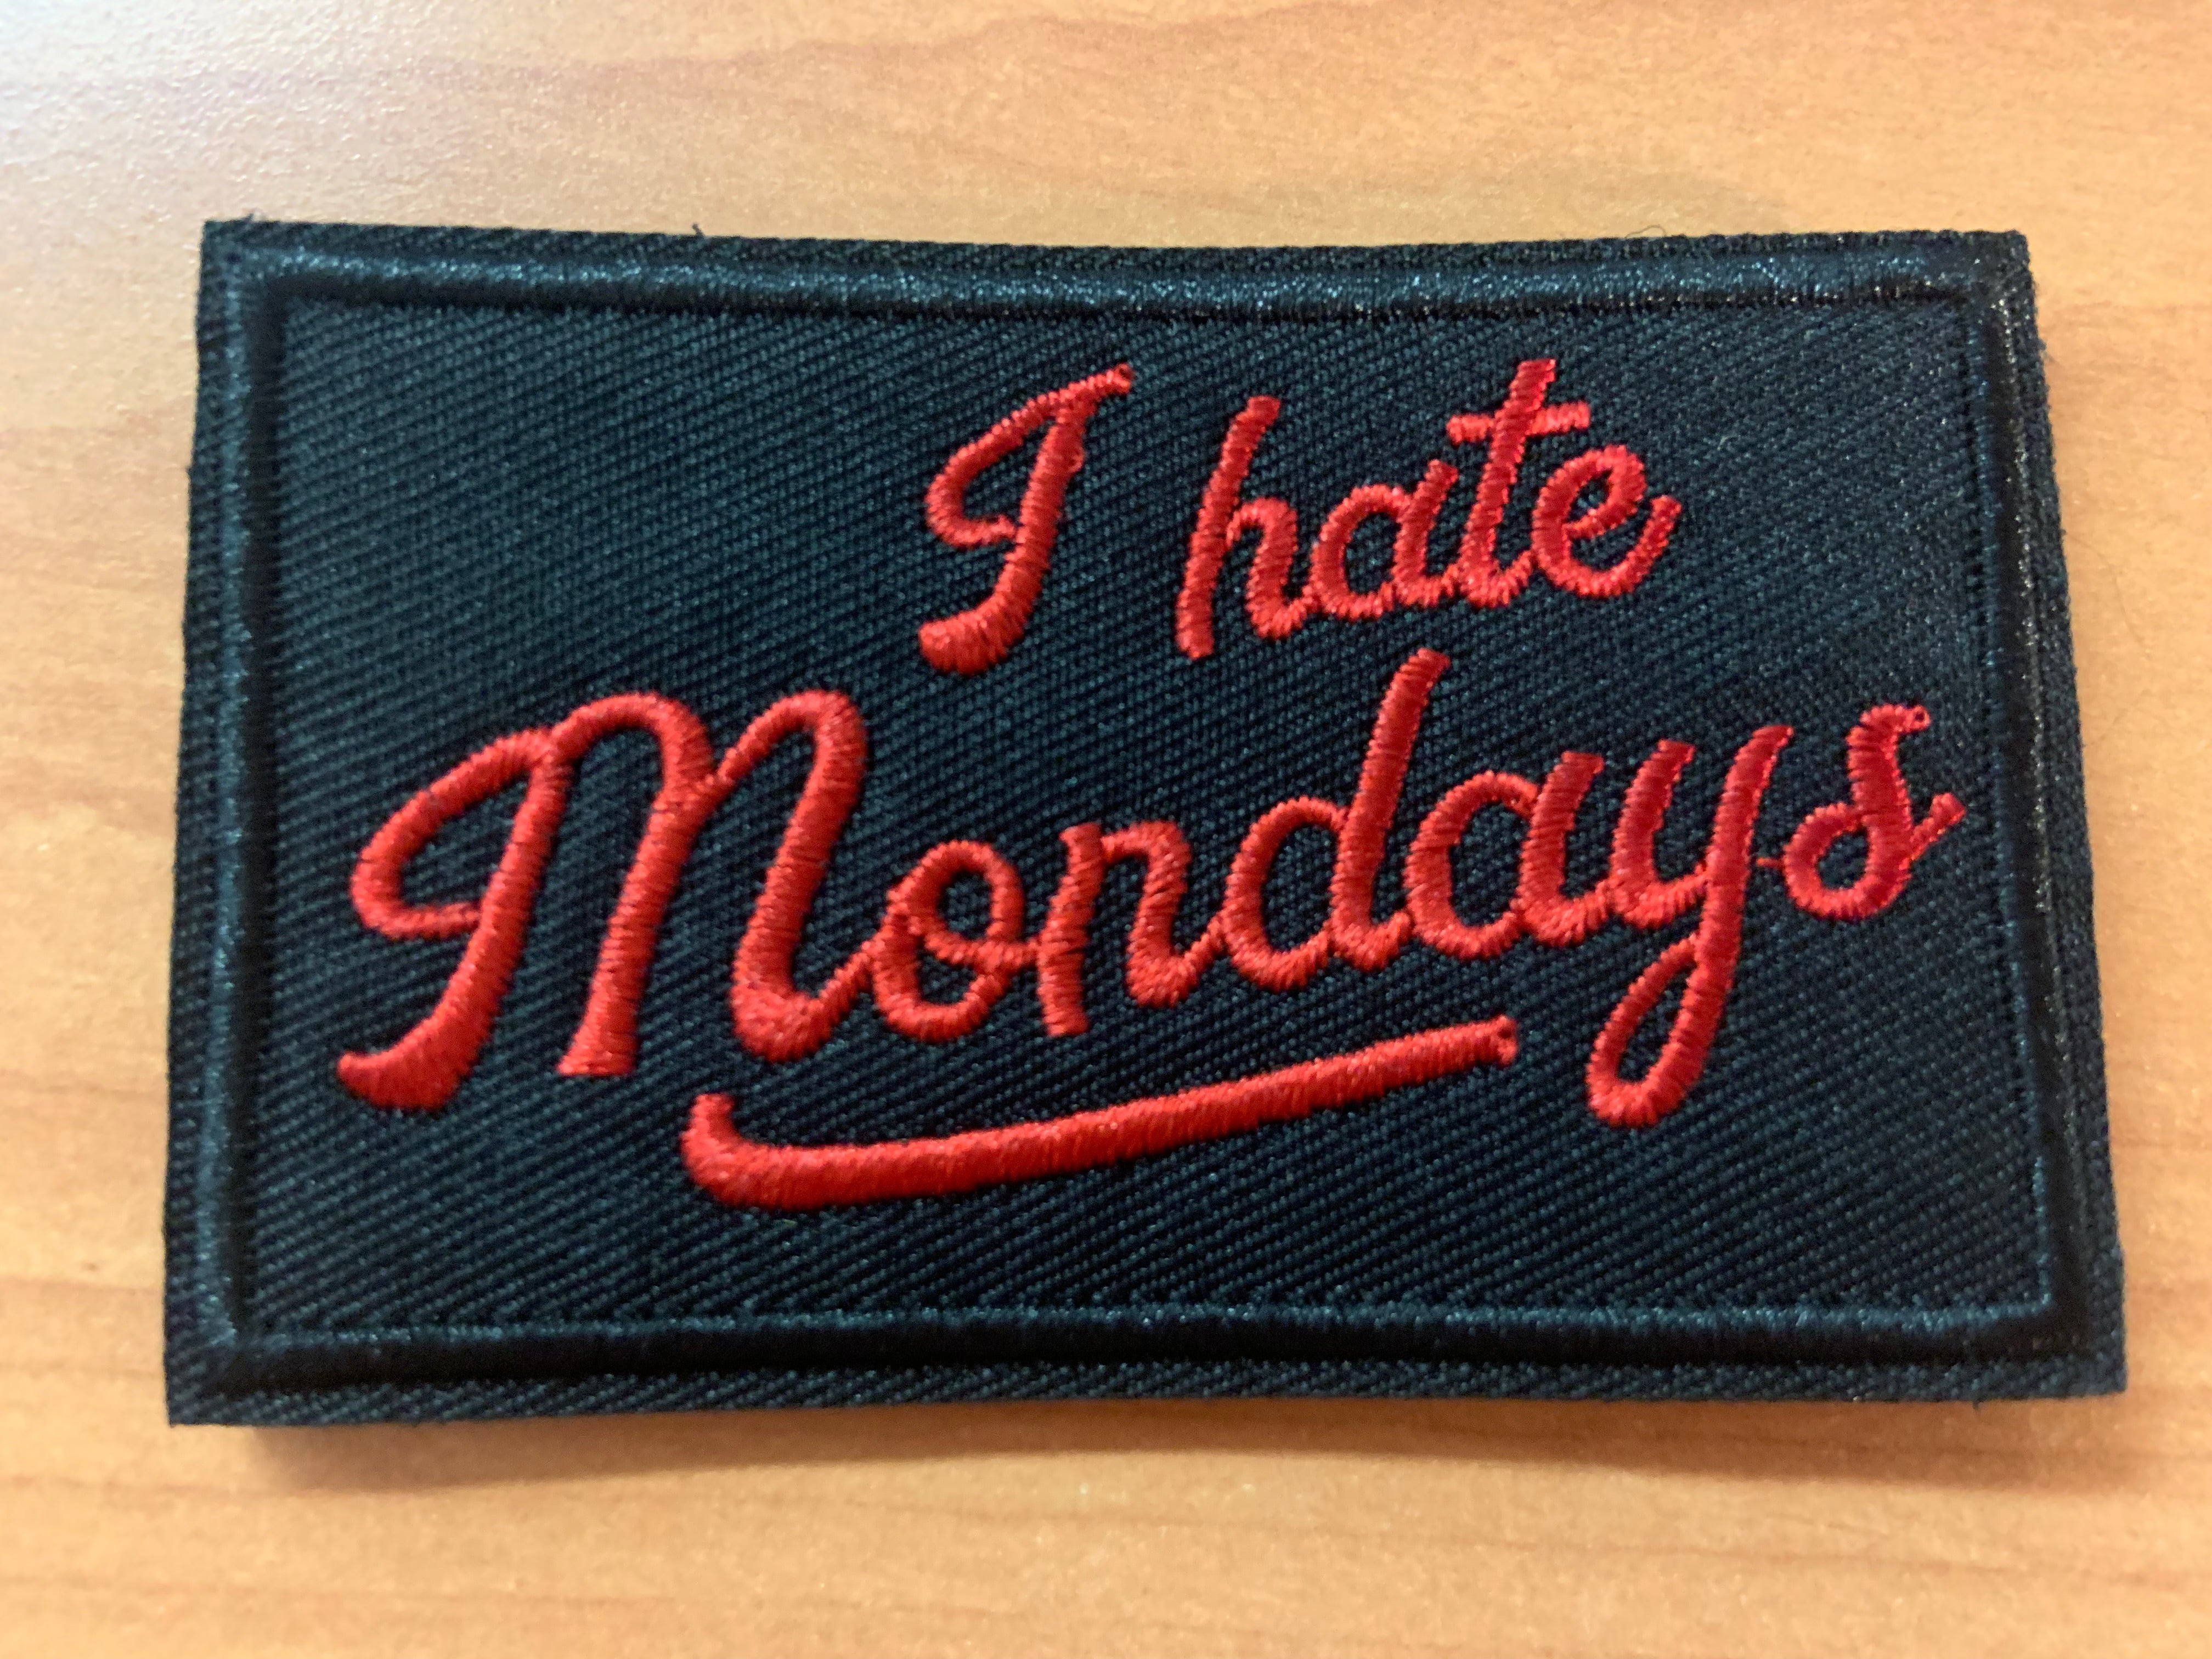 I Hate Mondays Patch – Soldier Solutions LLC